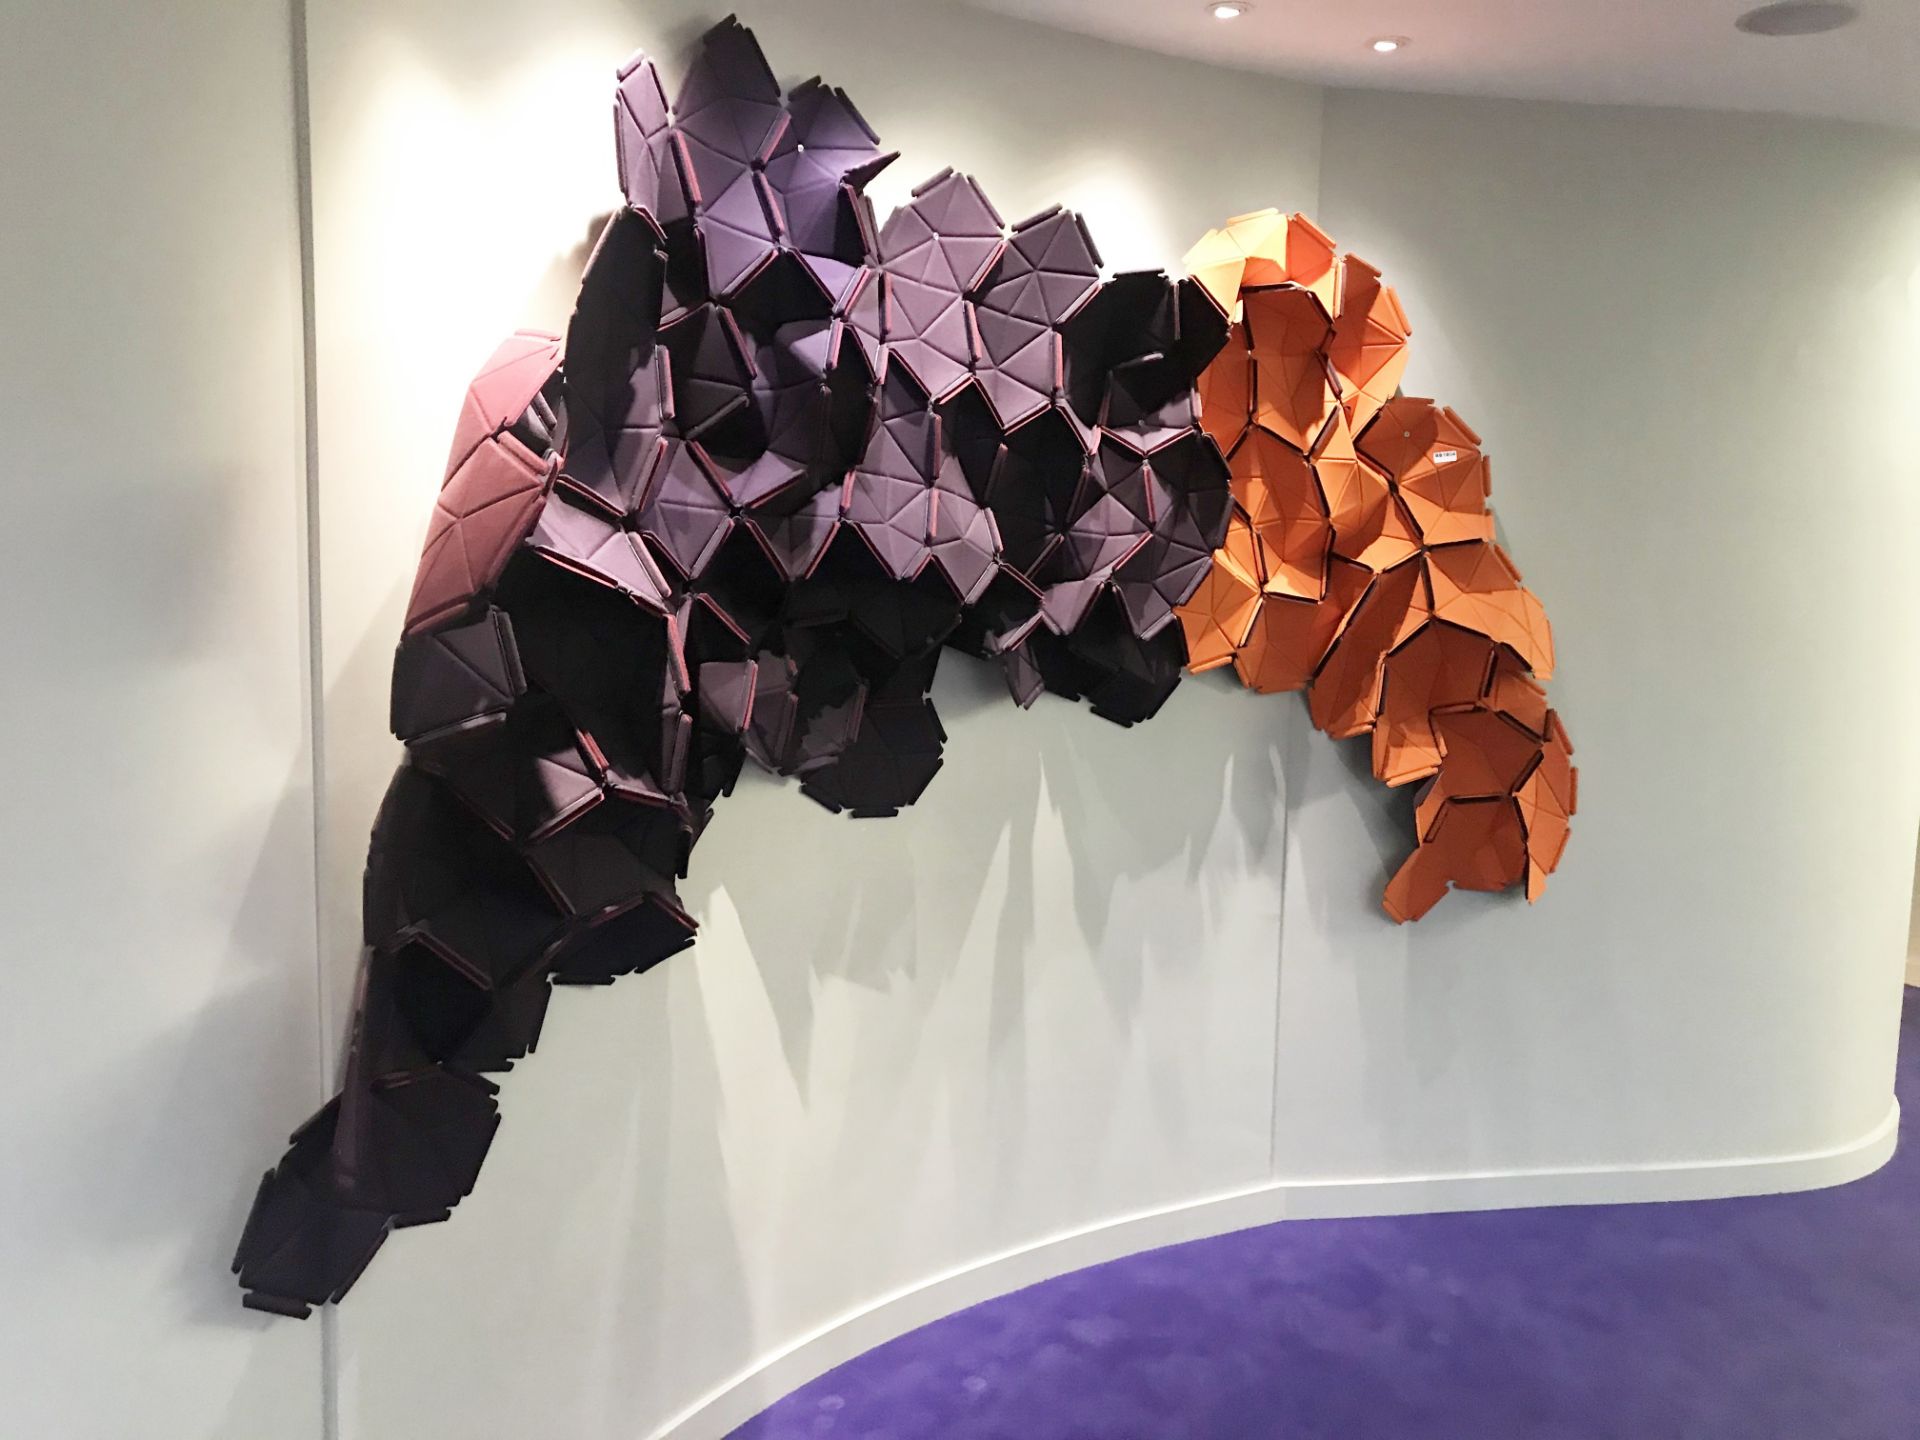 1 x Kvadrat Cloud Three-Dimensional Contemporary Wall Art - 100% Wool - Designed By Ronan and - Image 3 of 7